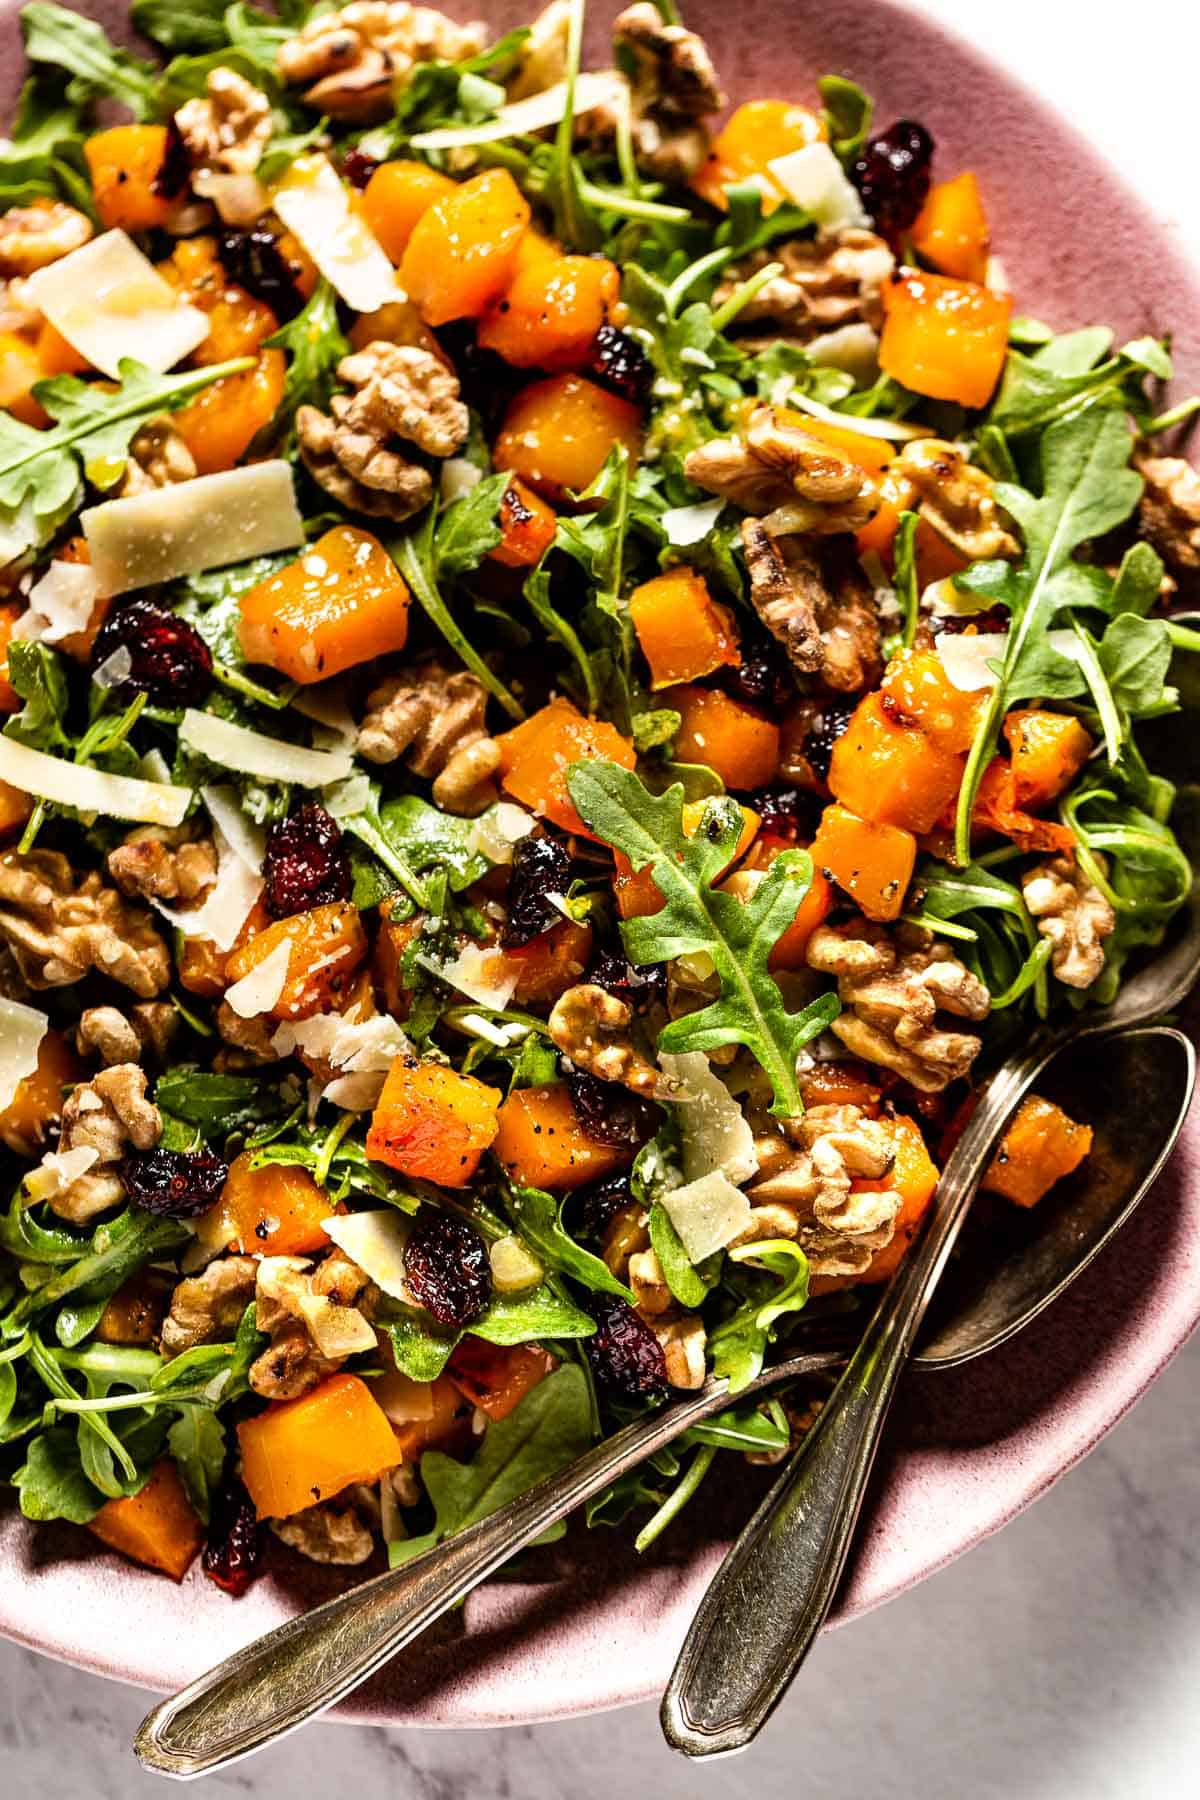 Butternut squash salad with arugula with utensils on the side.